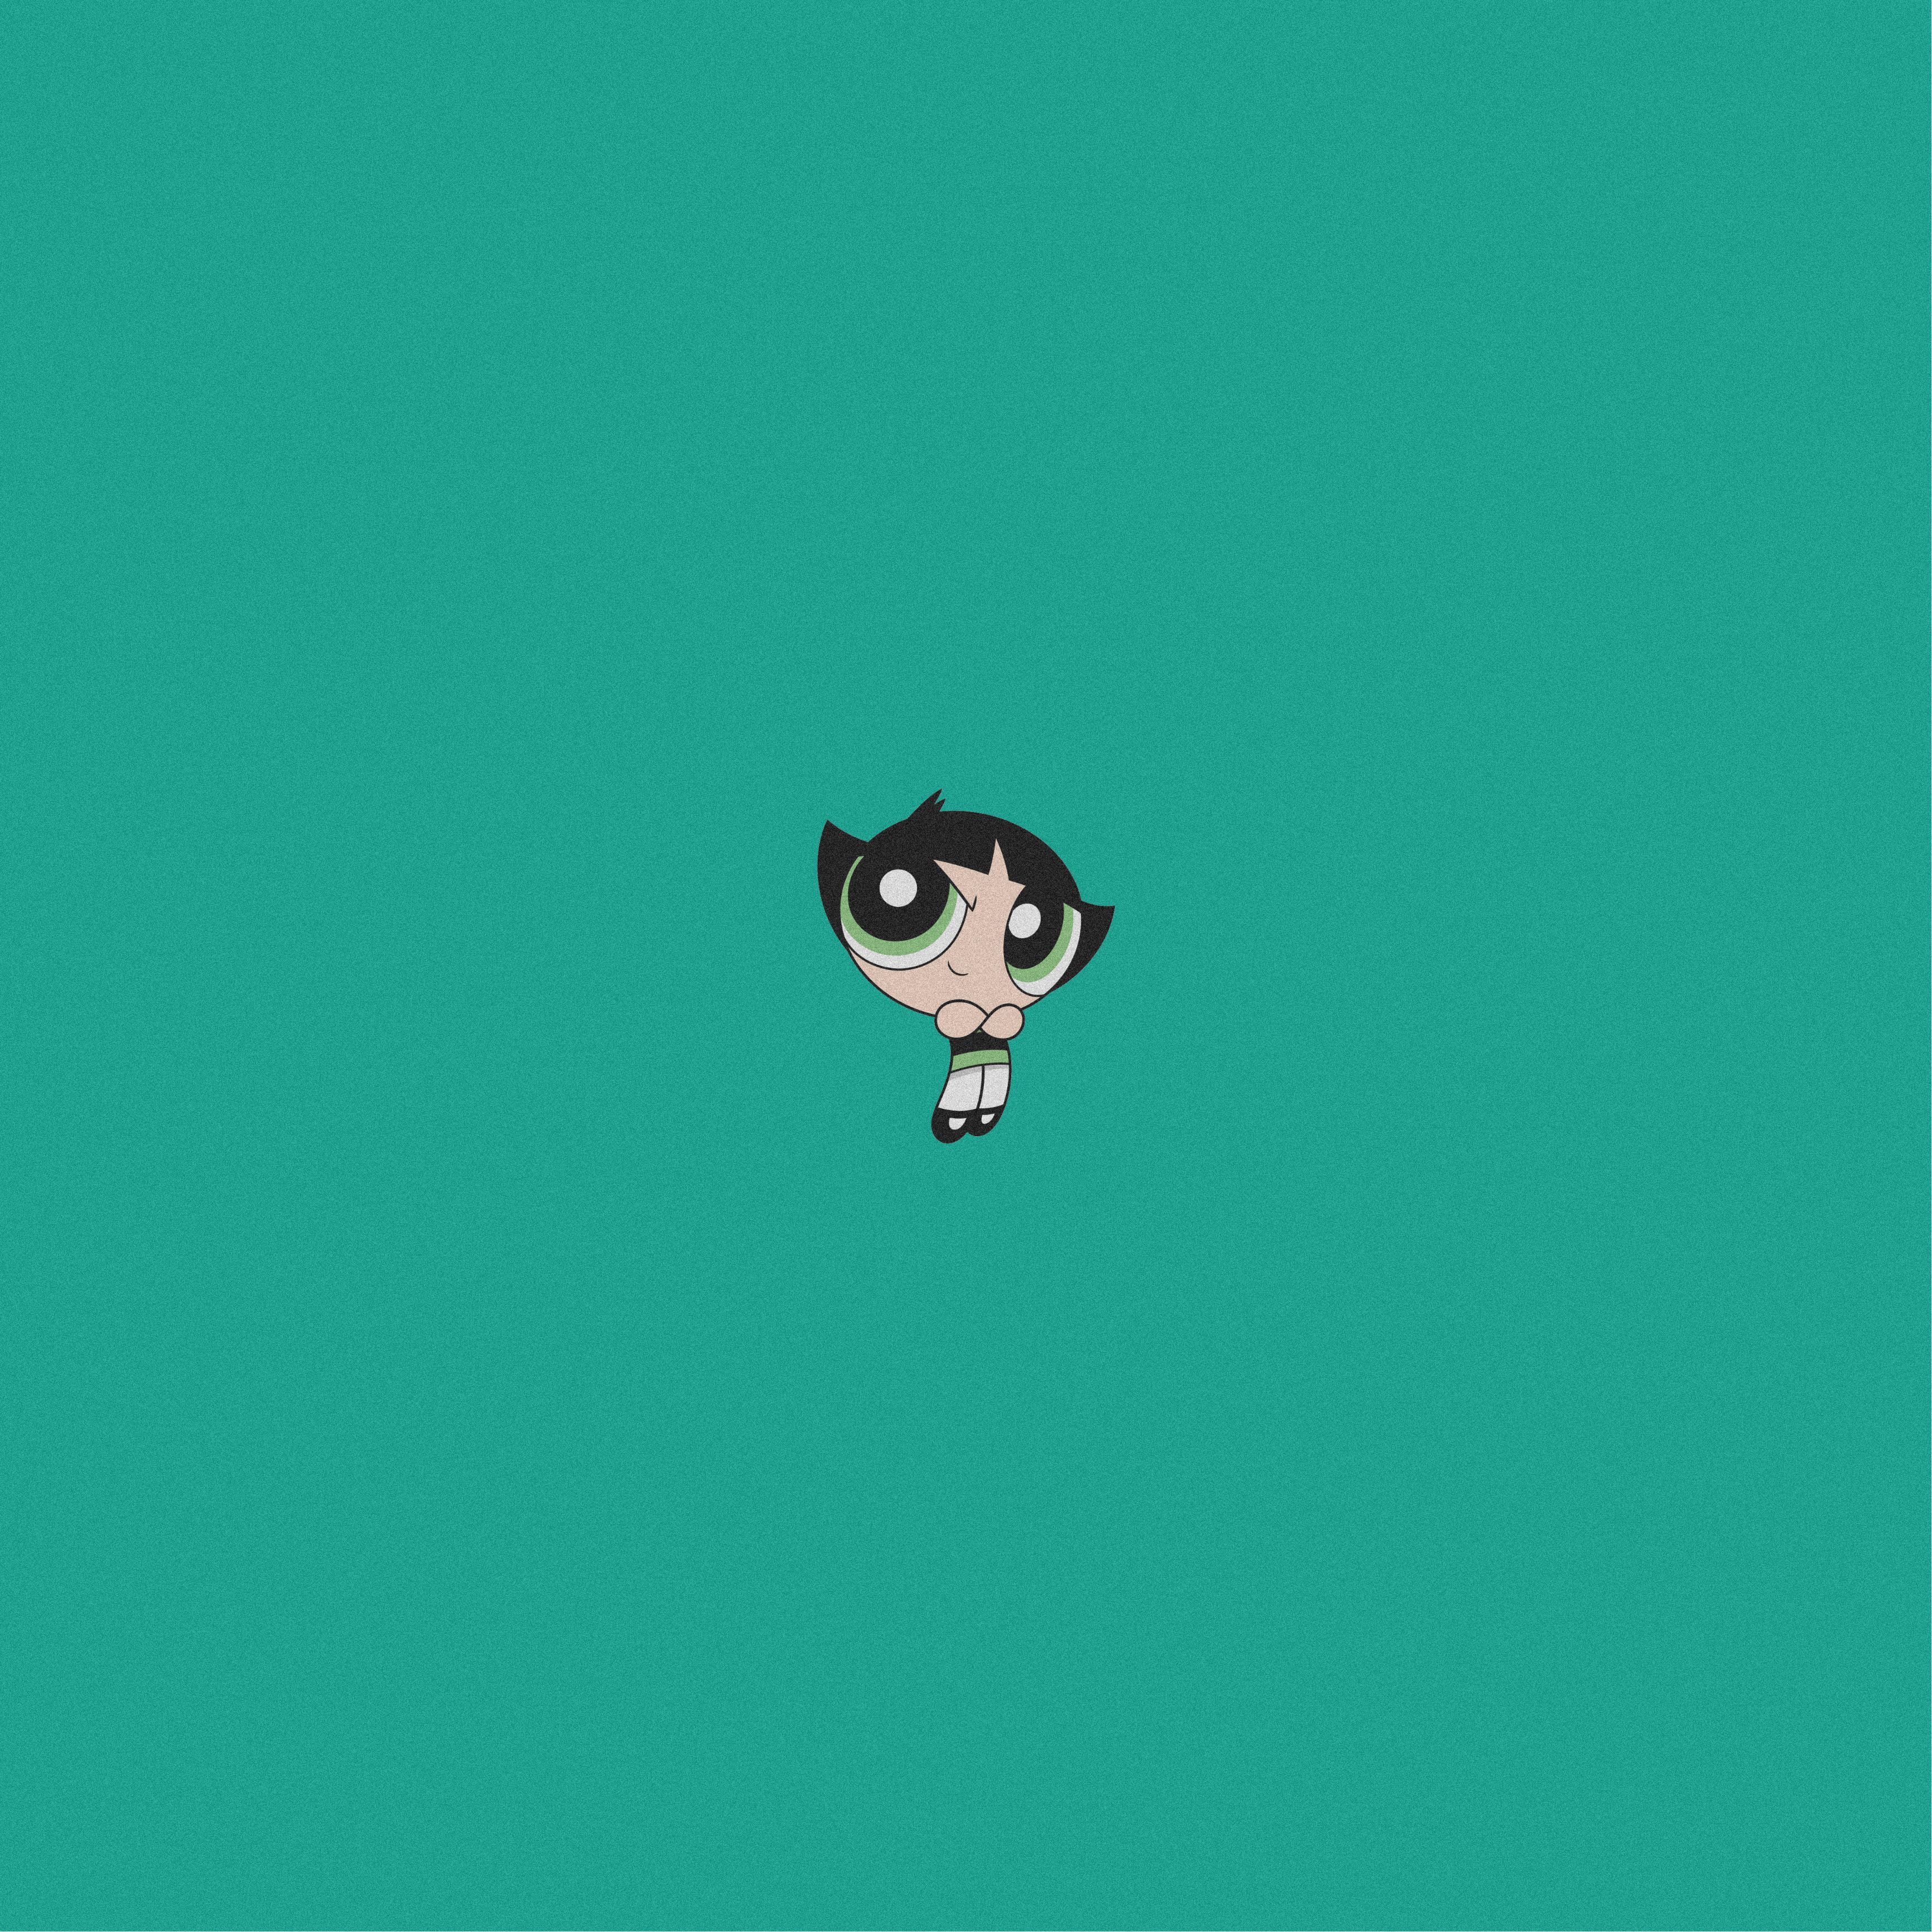 Buttercup from The Powerpuff Girls on a teal background - Buttercup, The Powerpuff Girls